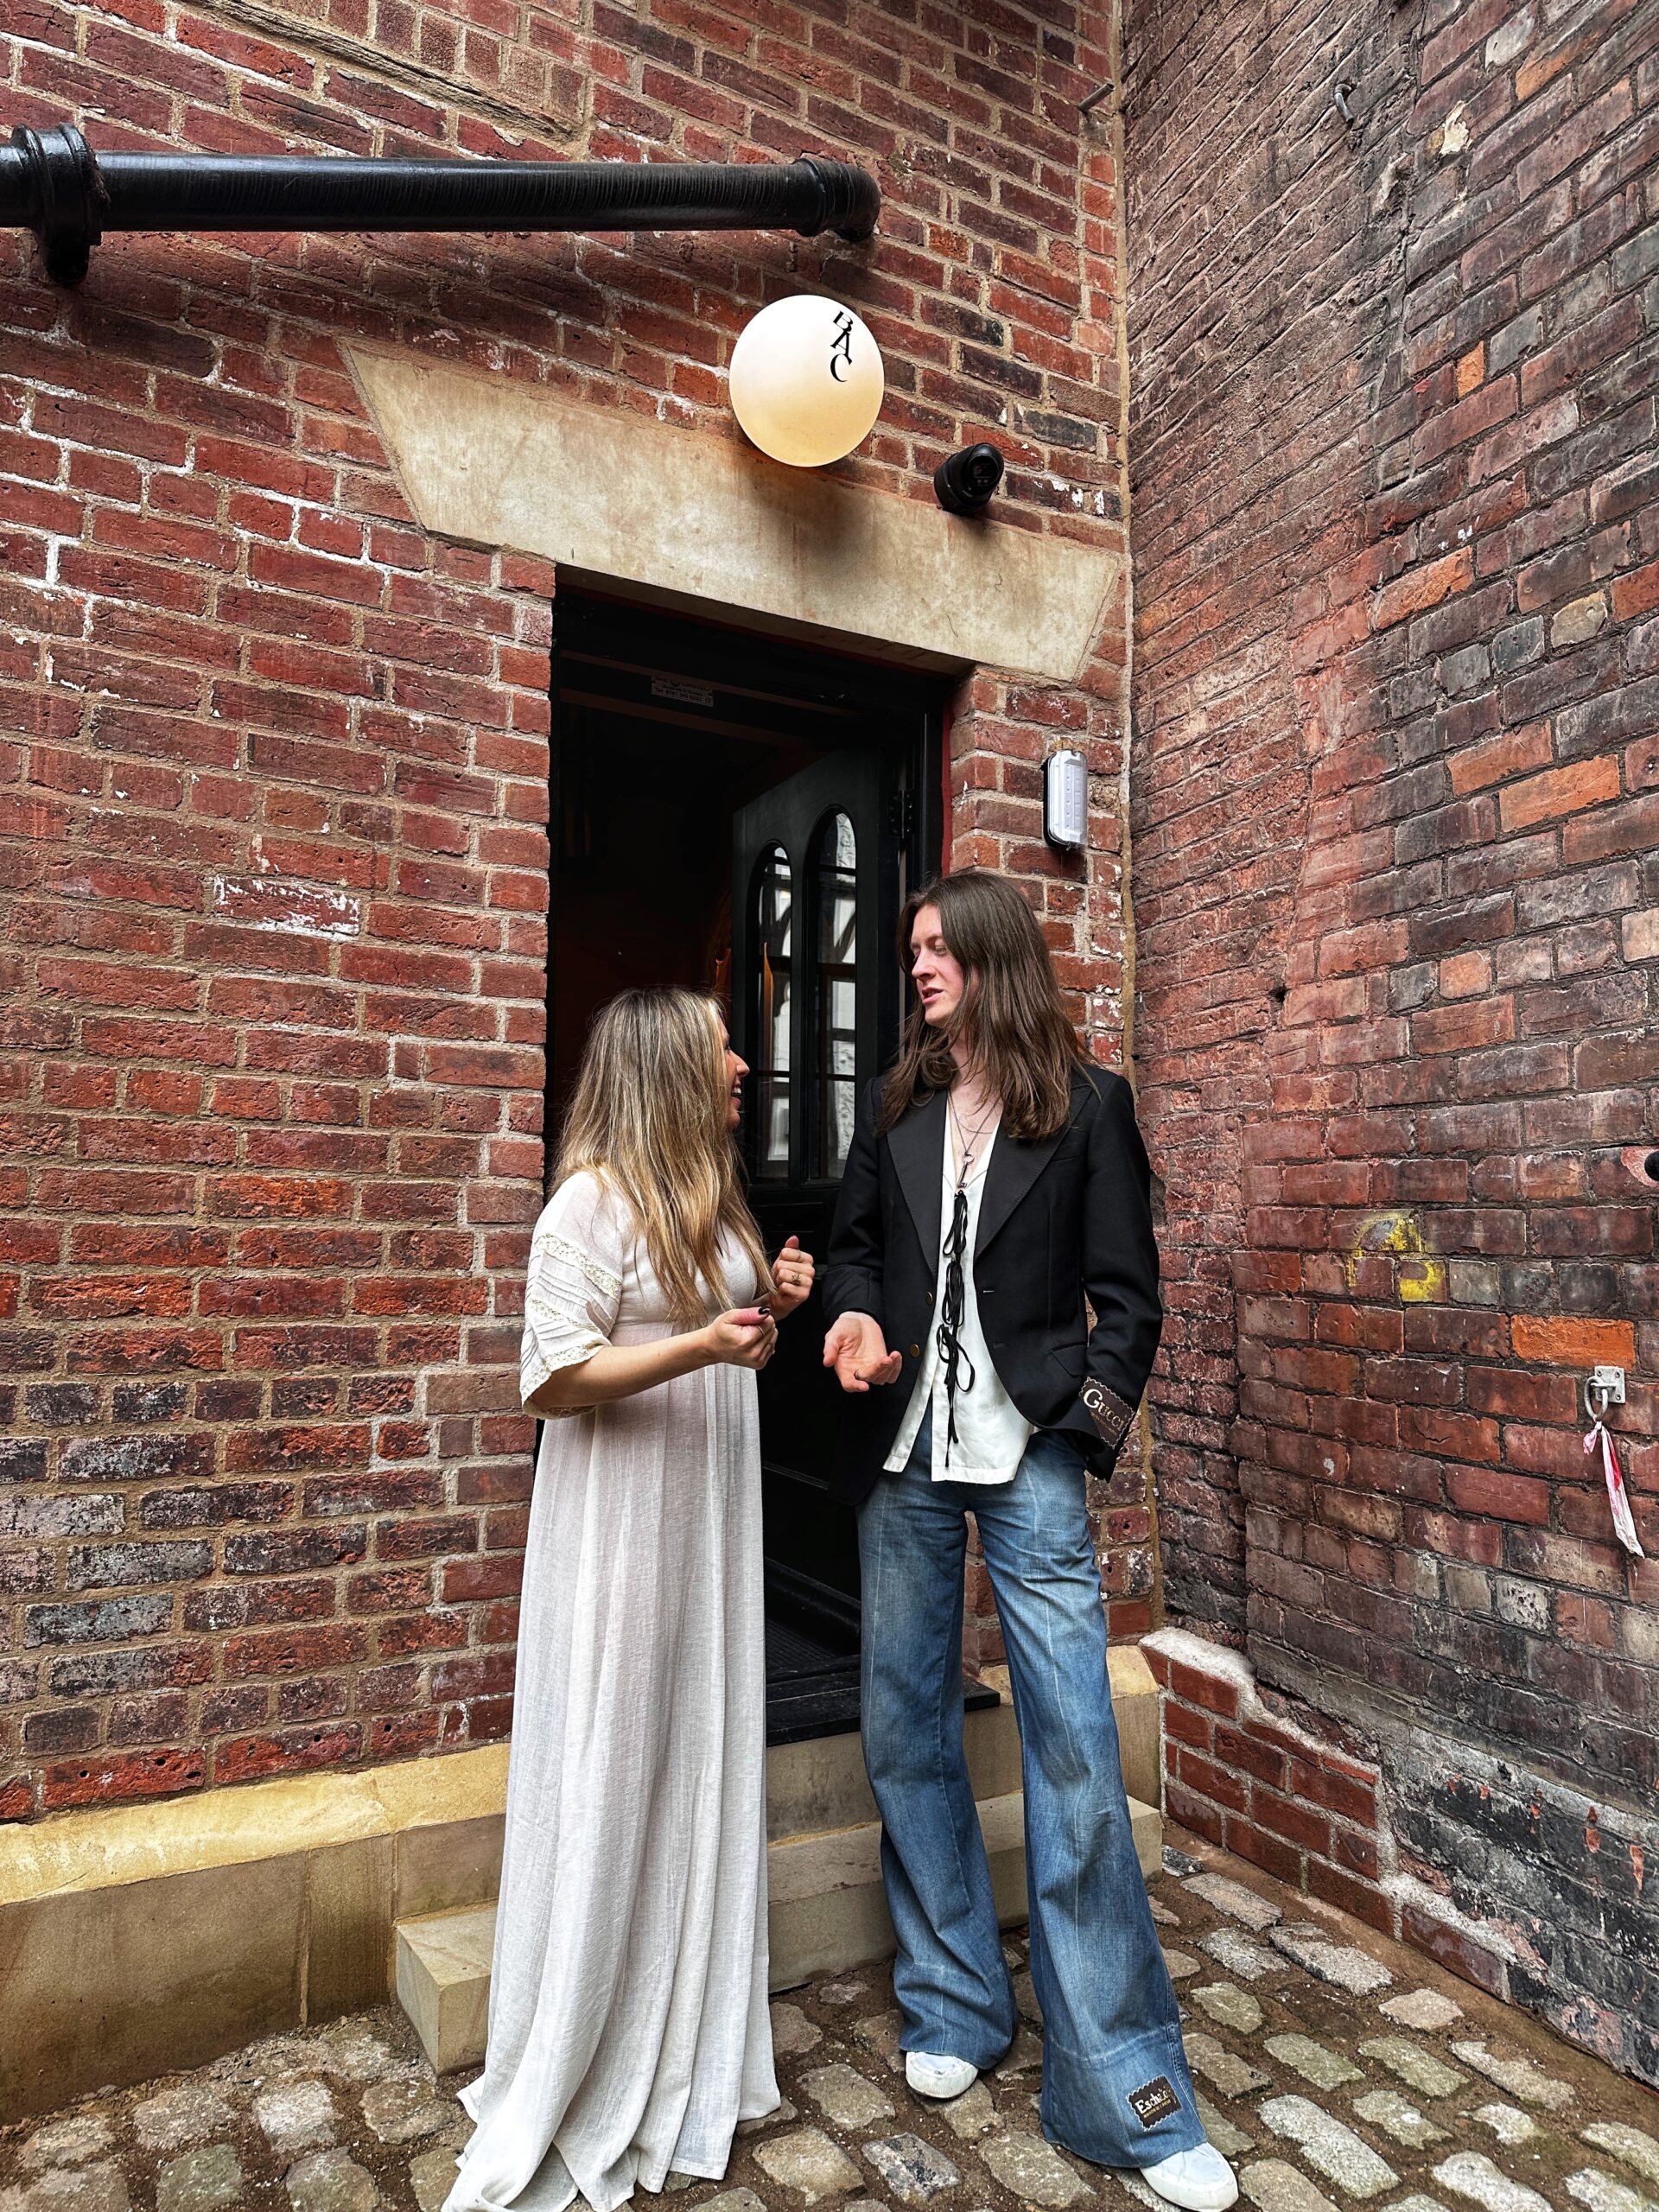 Tom and Katie Ogden outside Bohemian Arts Club in Stockport